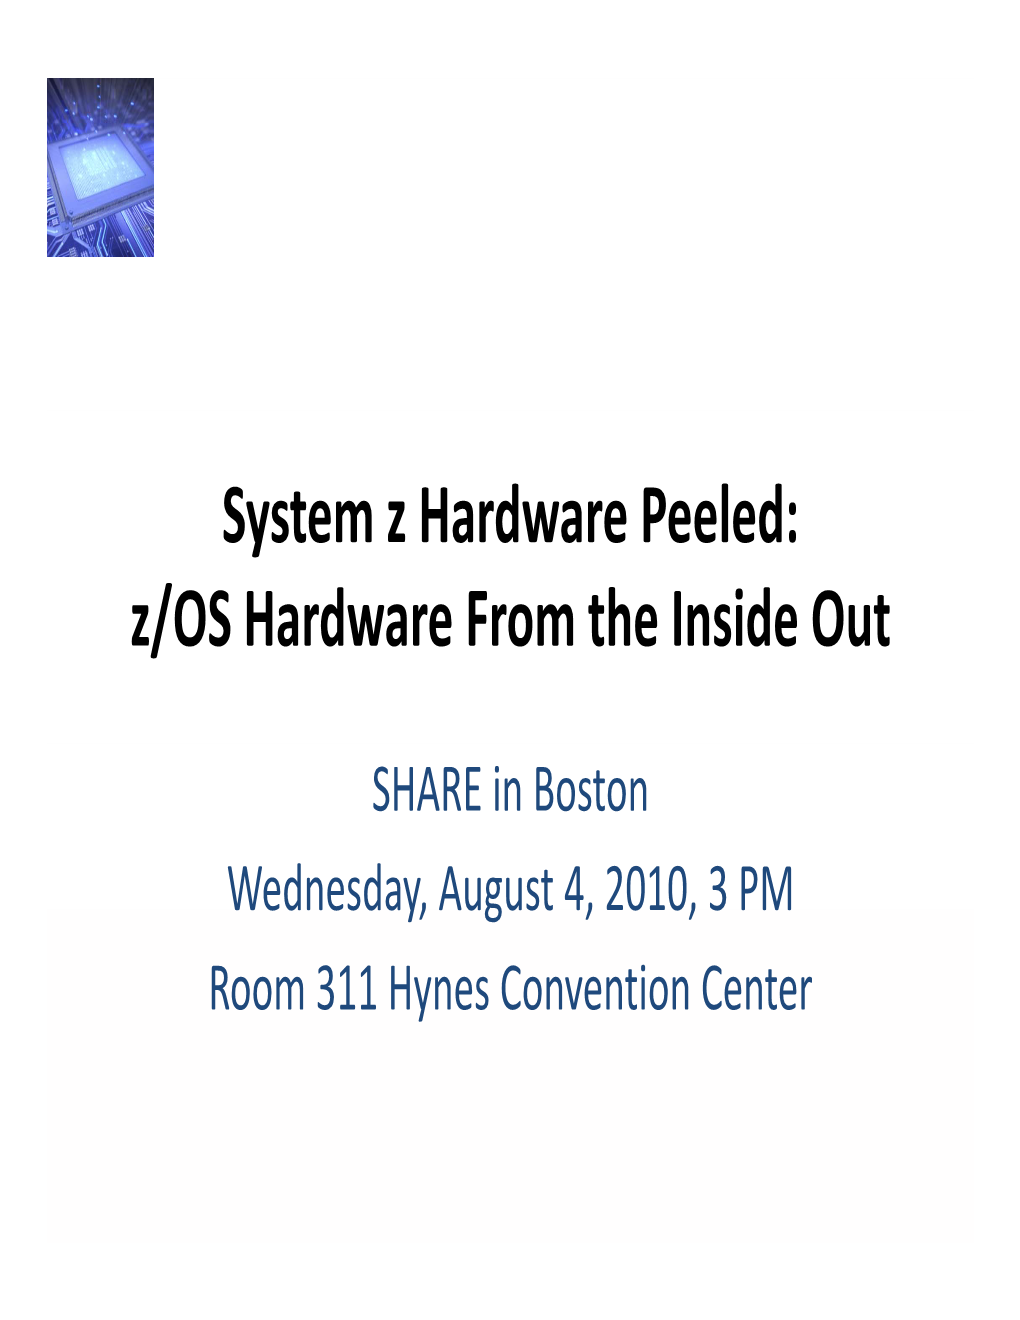 System Z Hardware Peeled: Z/OS Hardware from the Inside Out